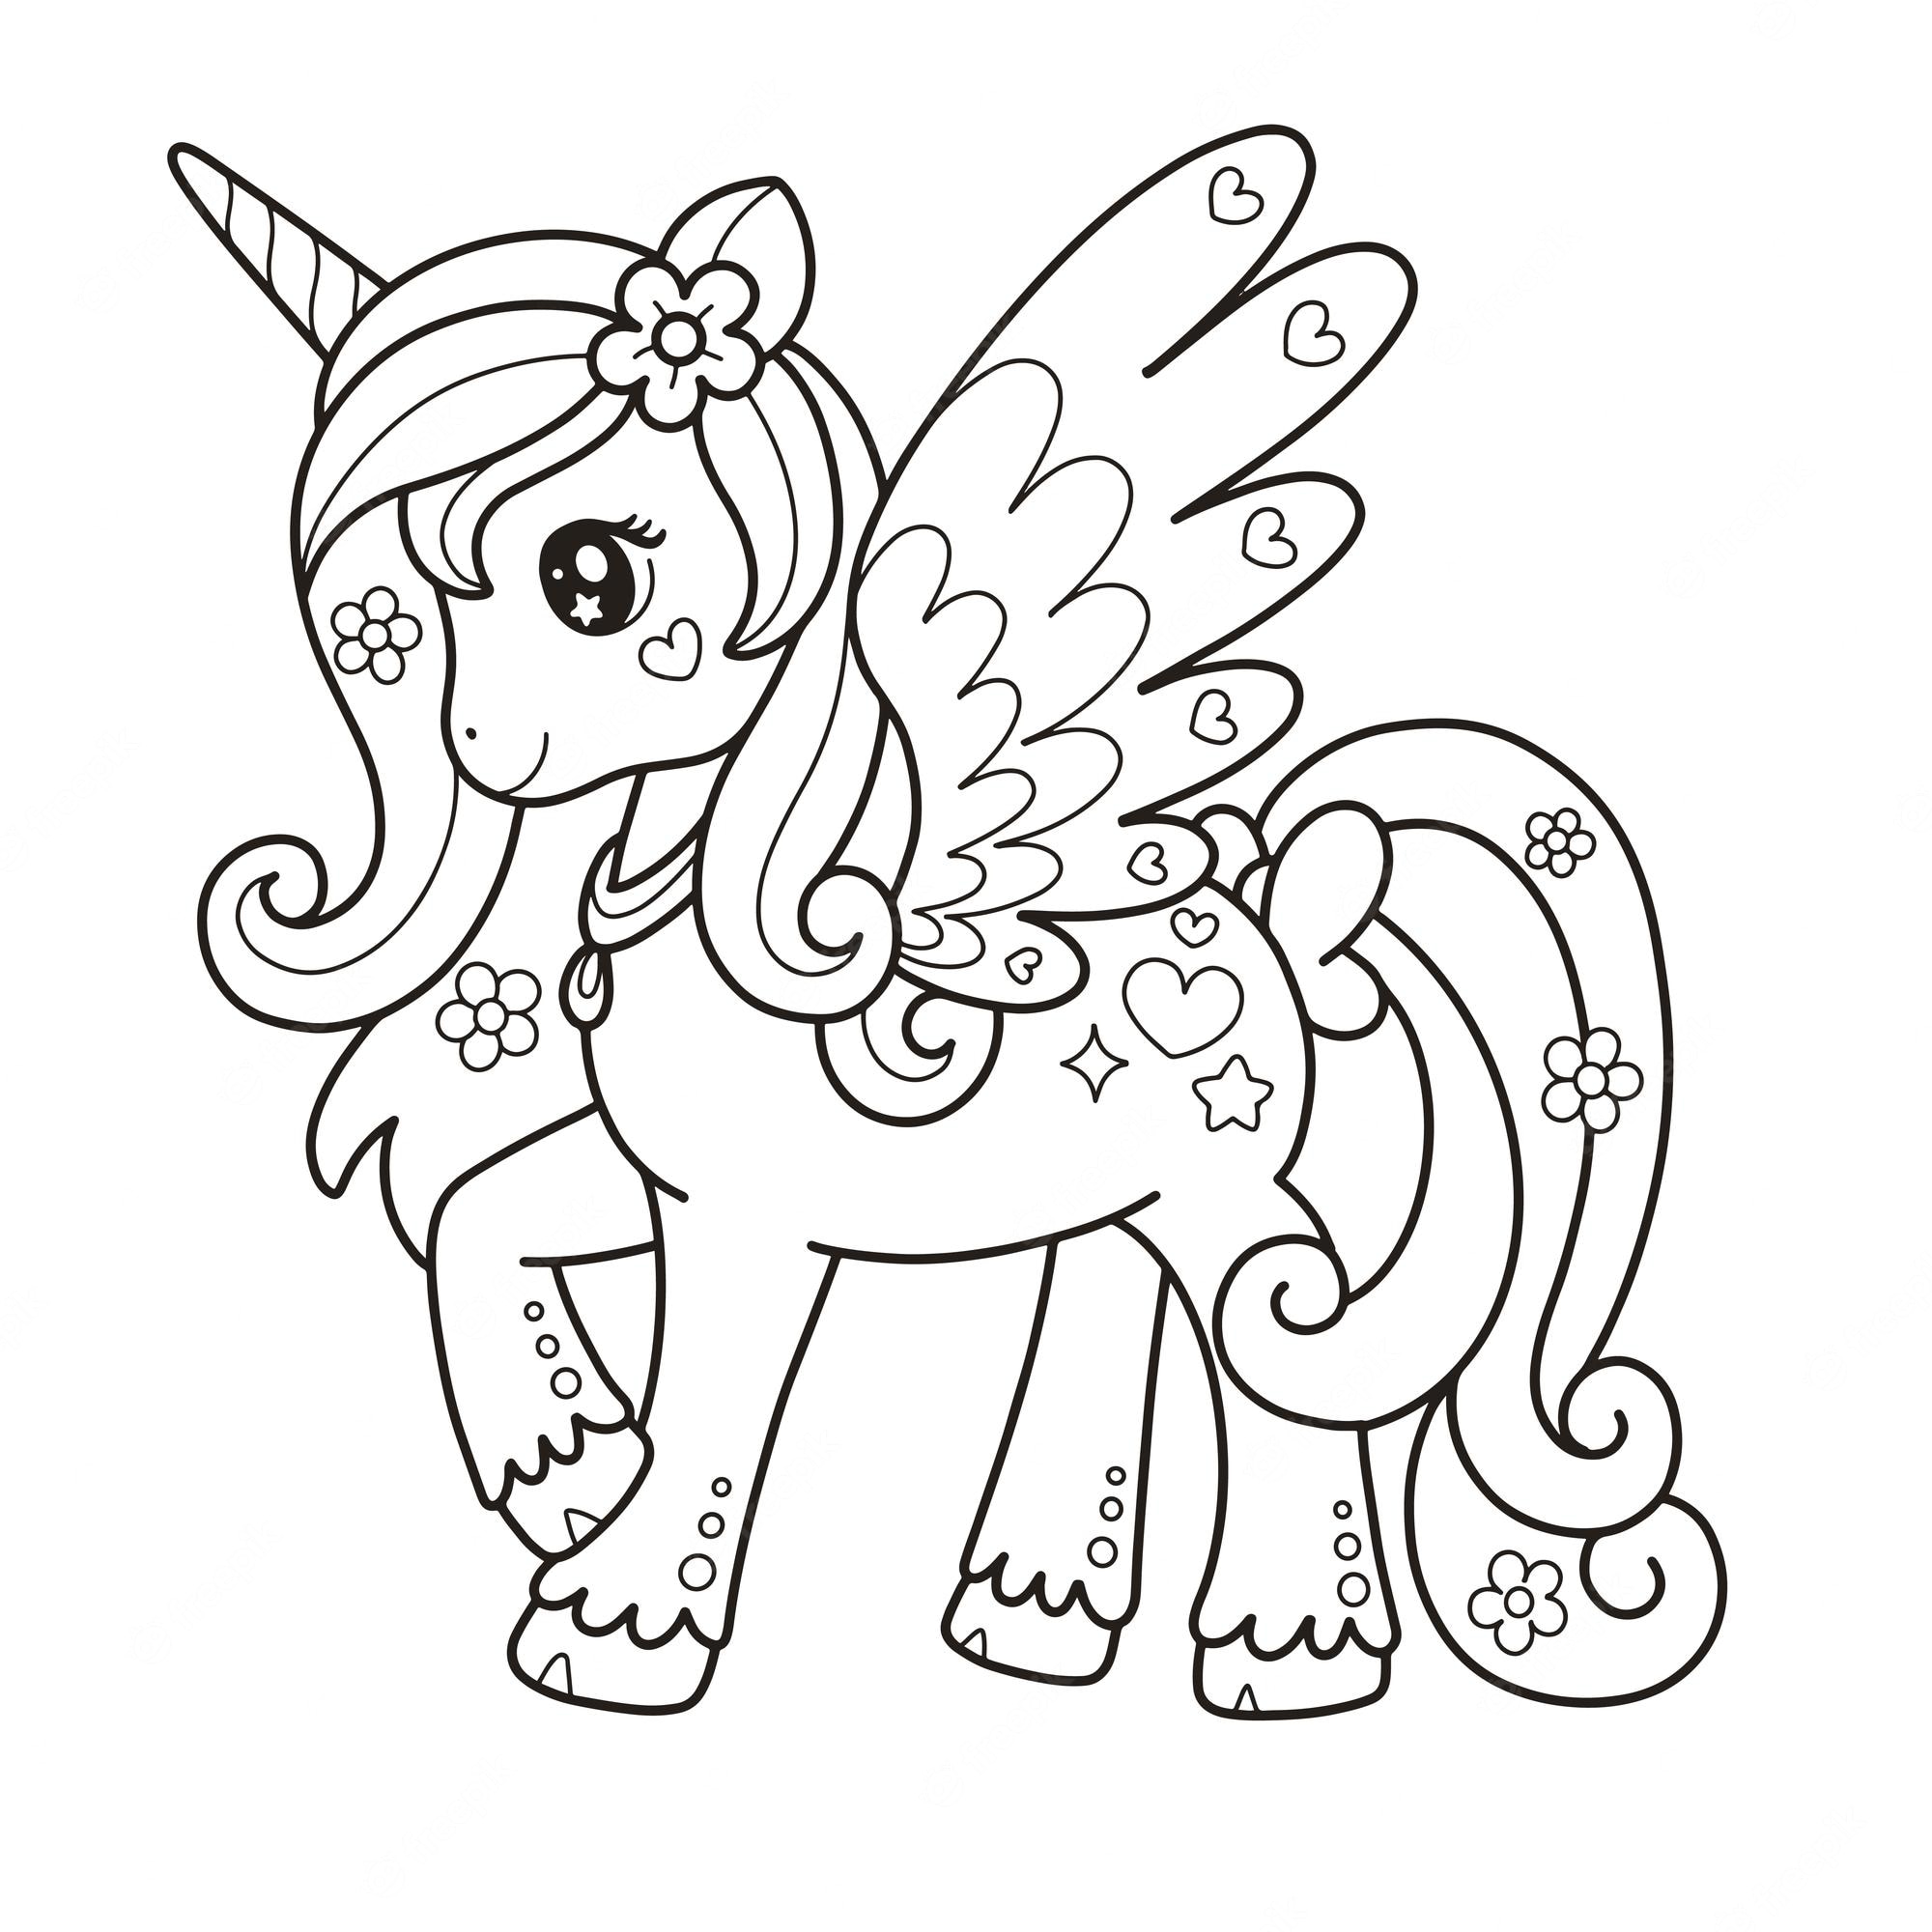 Printable Lovely Unicorn Coloring Page for kids.